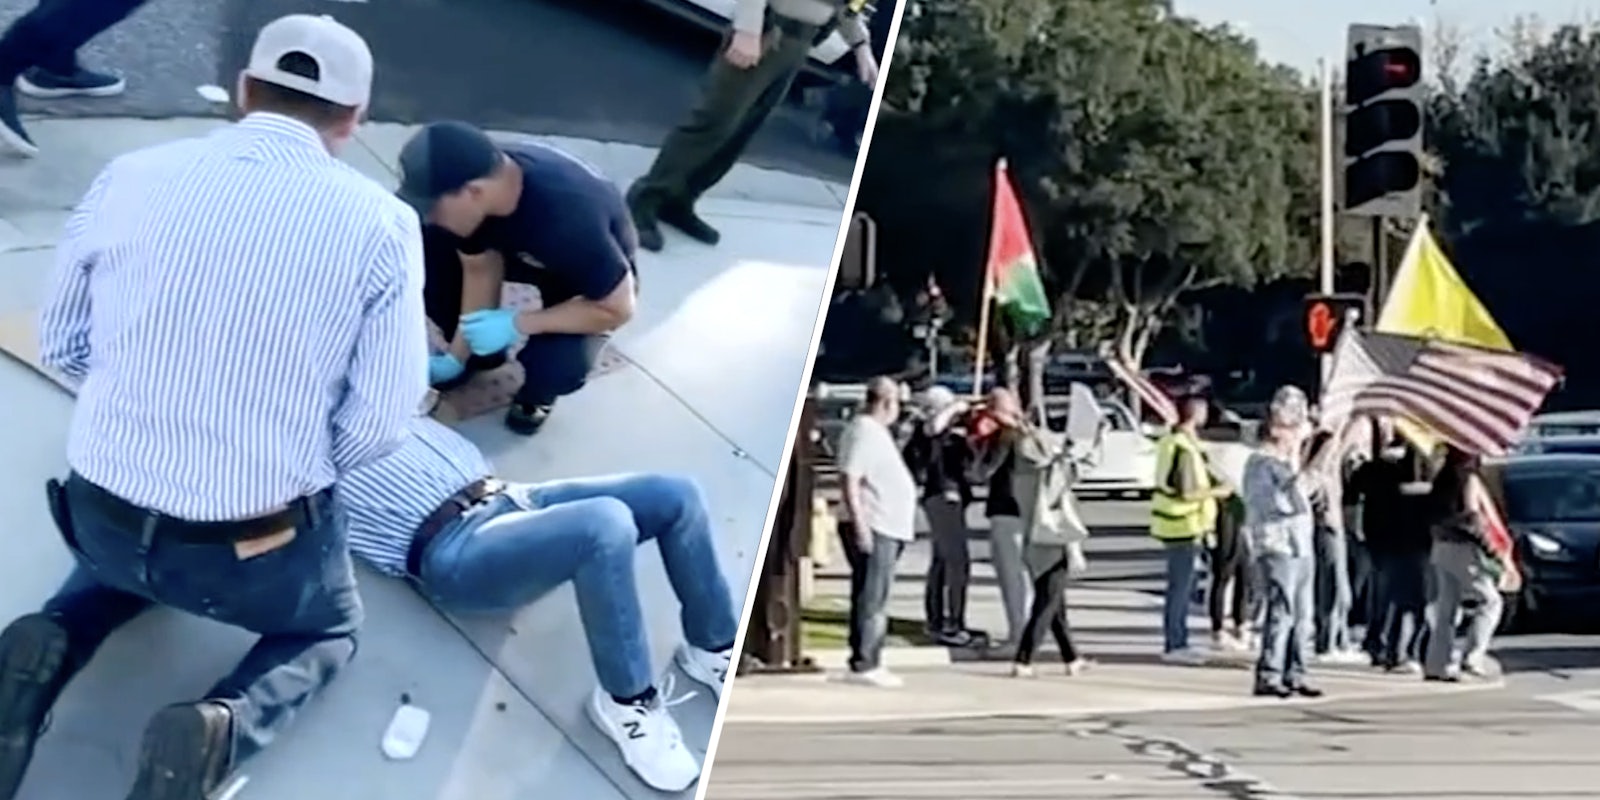 Man on ground being helped(l), Protesters(r)